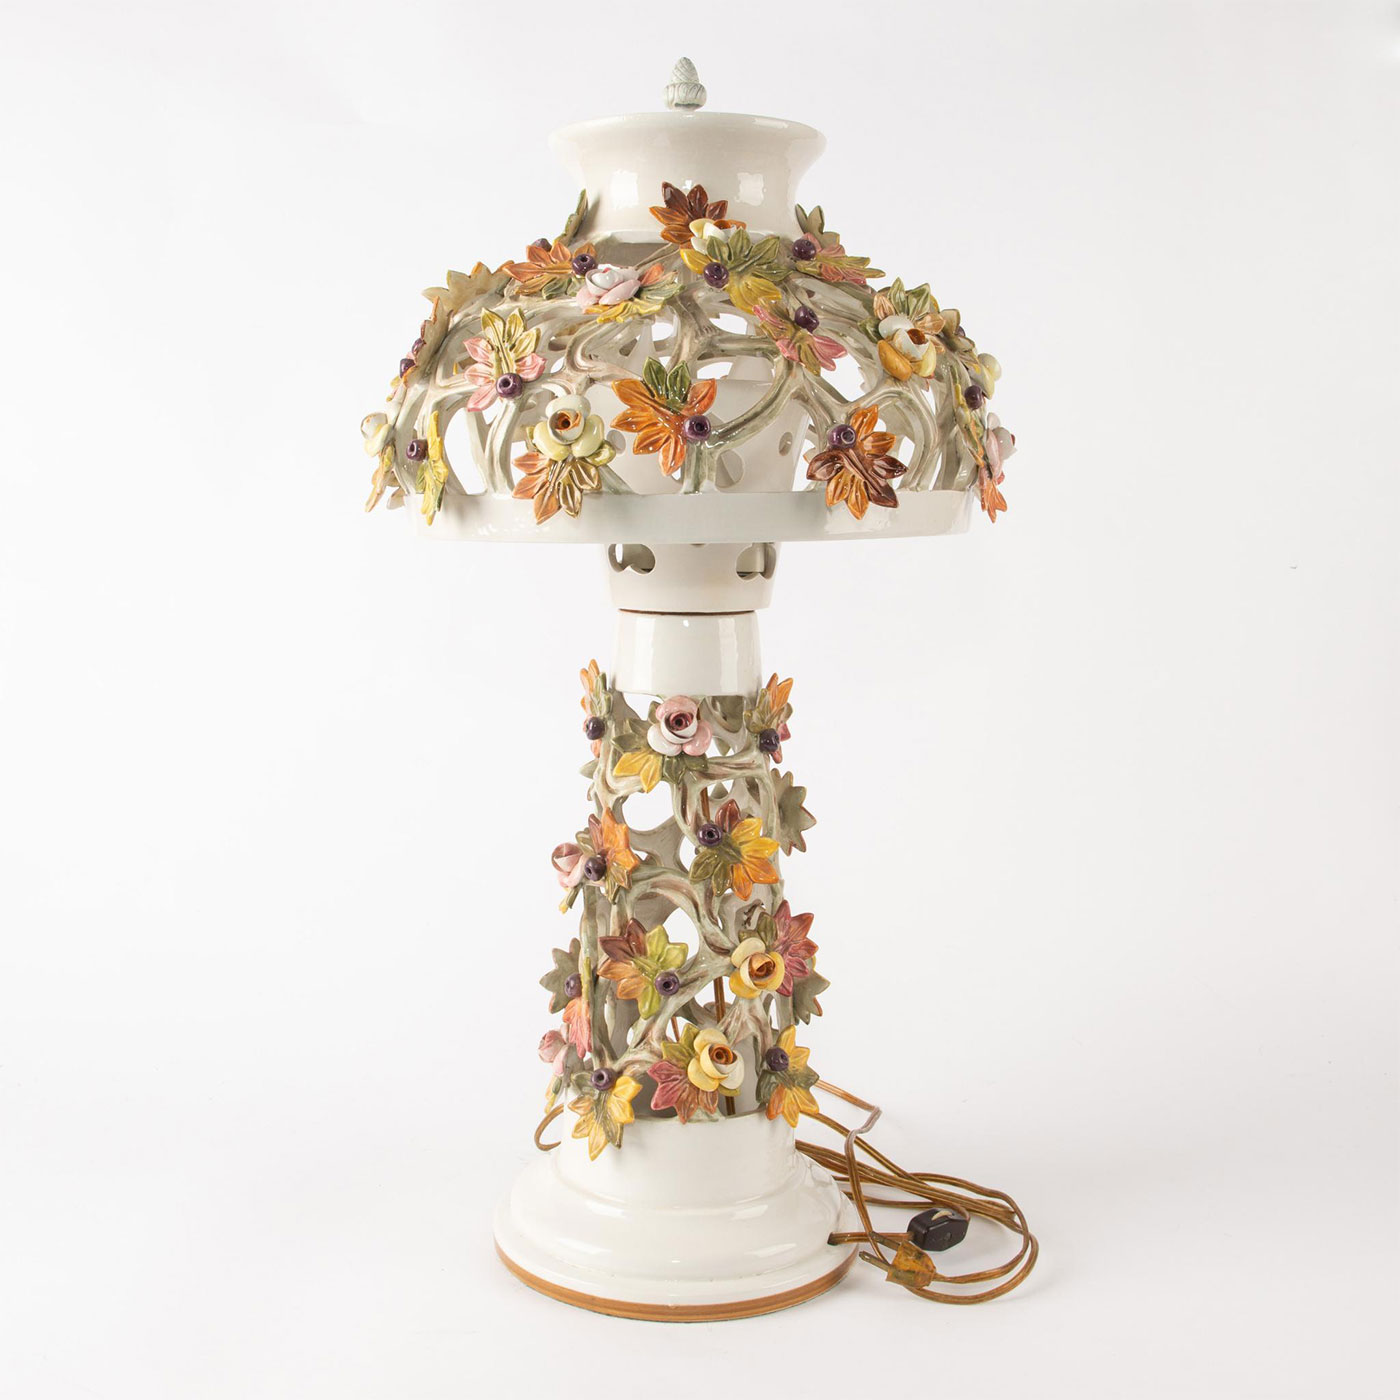 VICTORIAN MAJOLICA INSPIRED CERAMIC FLORAL TABLE LAMP - Image 4 of 7